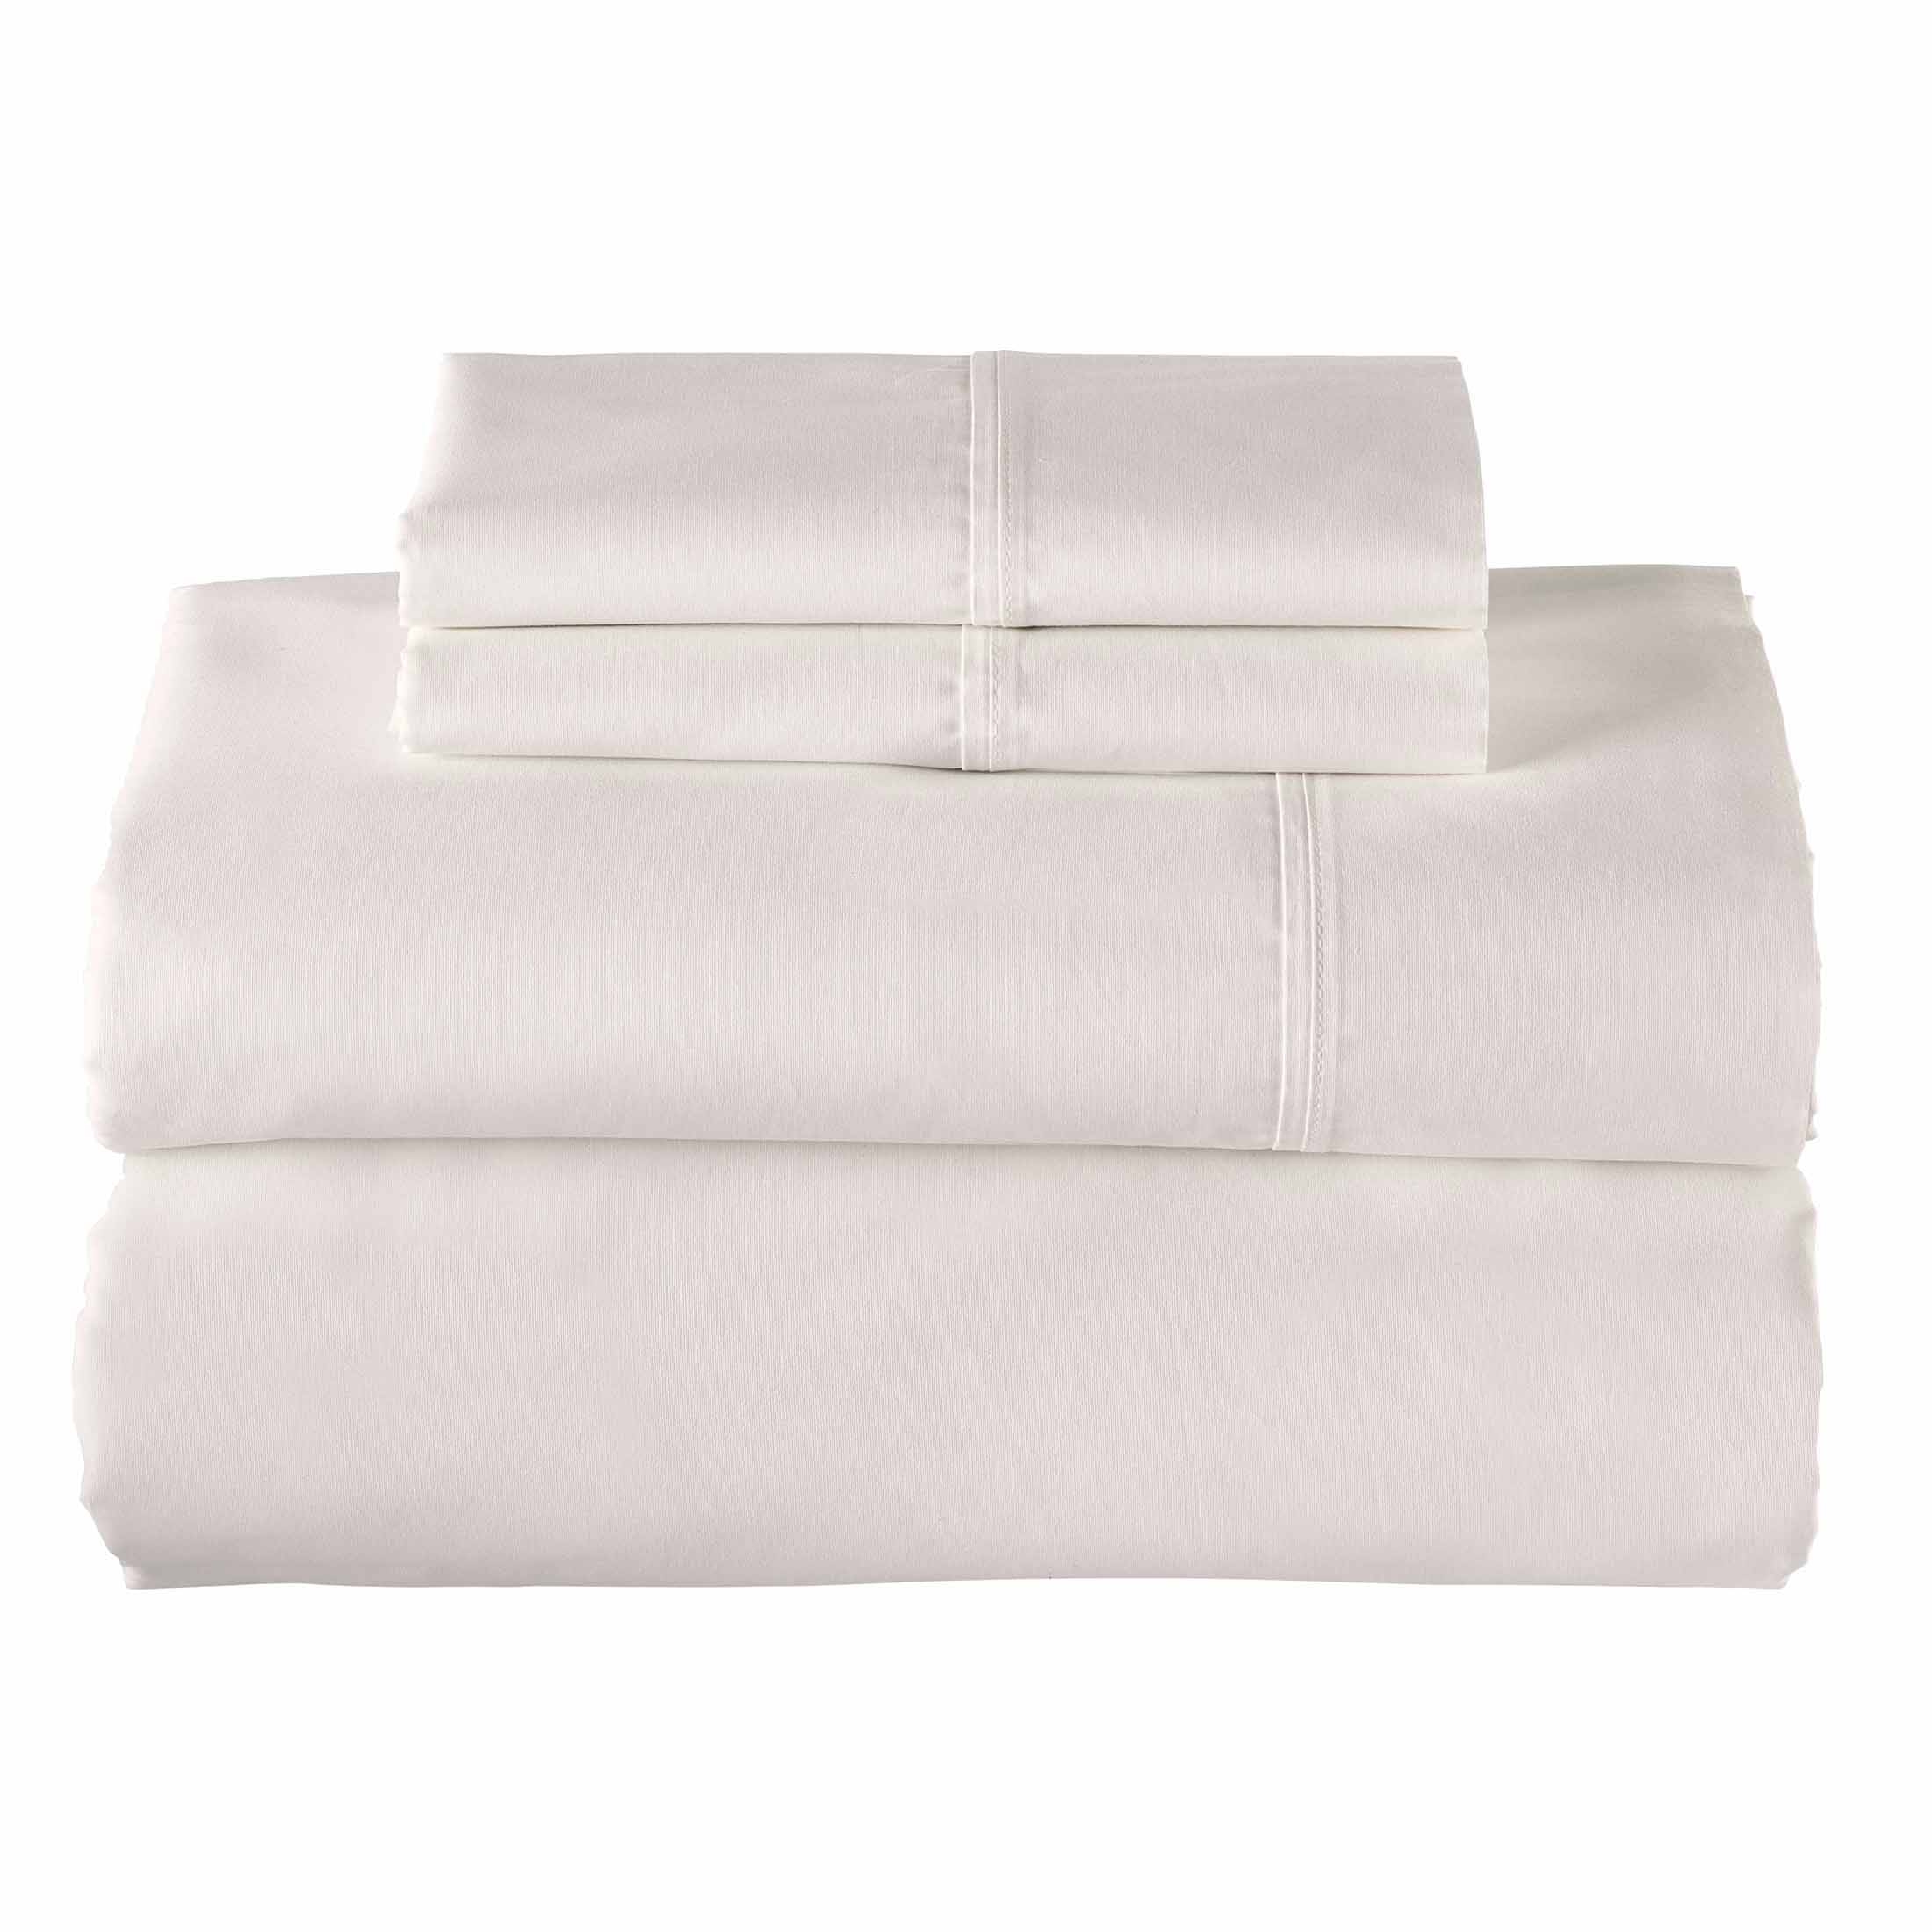 Better Homes & Gardens Cool & Crisp 4-Piece 300 Thread Count Arctic White Cotton Percale Sheet Set, Full - image 3 of 9